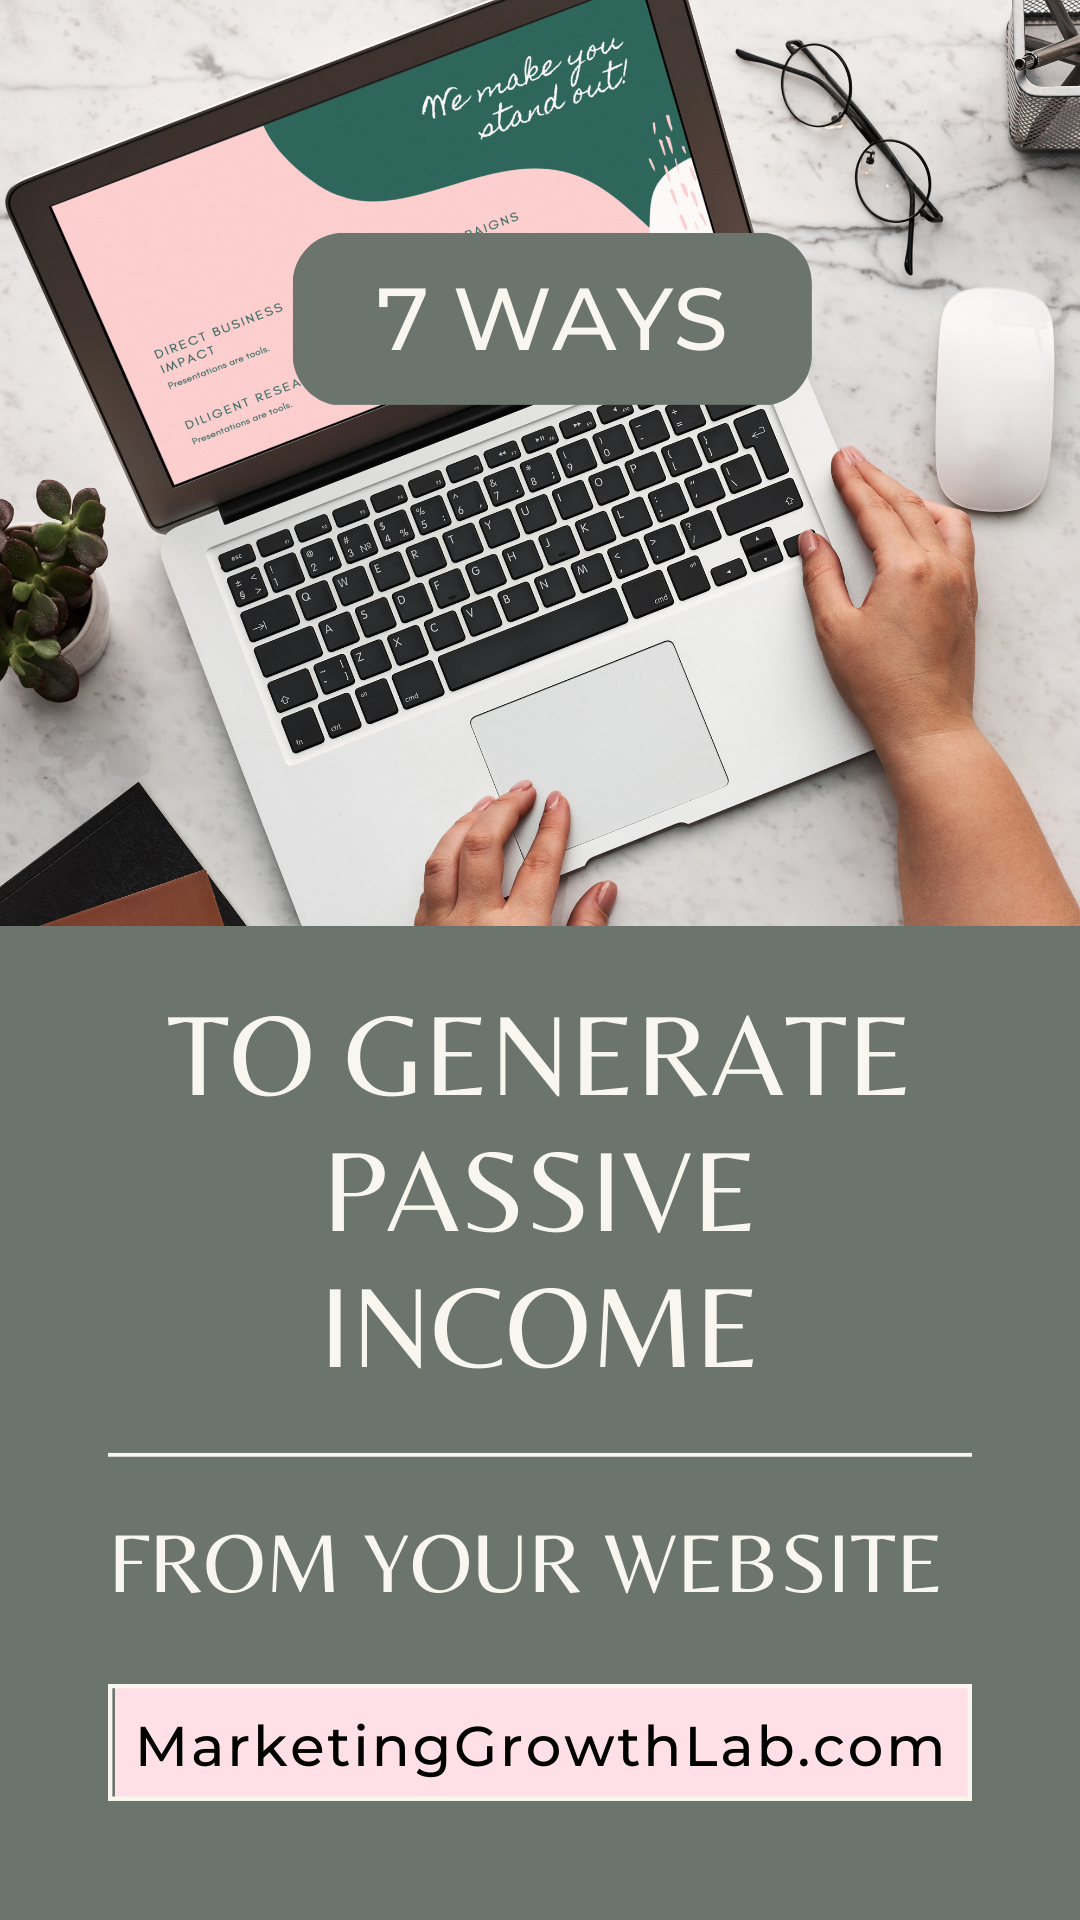 7 ways to generate passive income from your online business